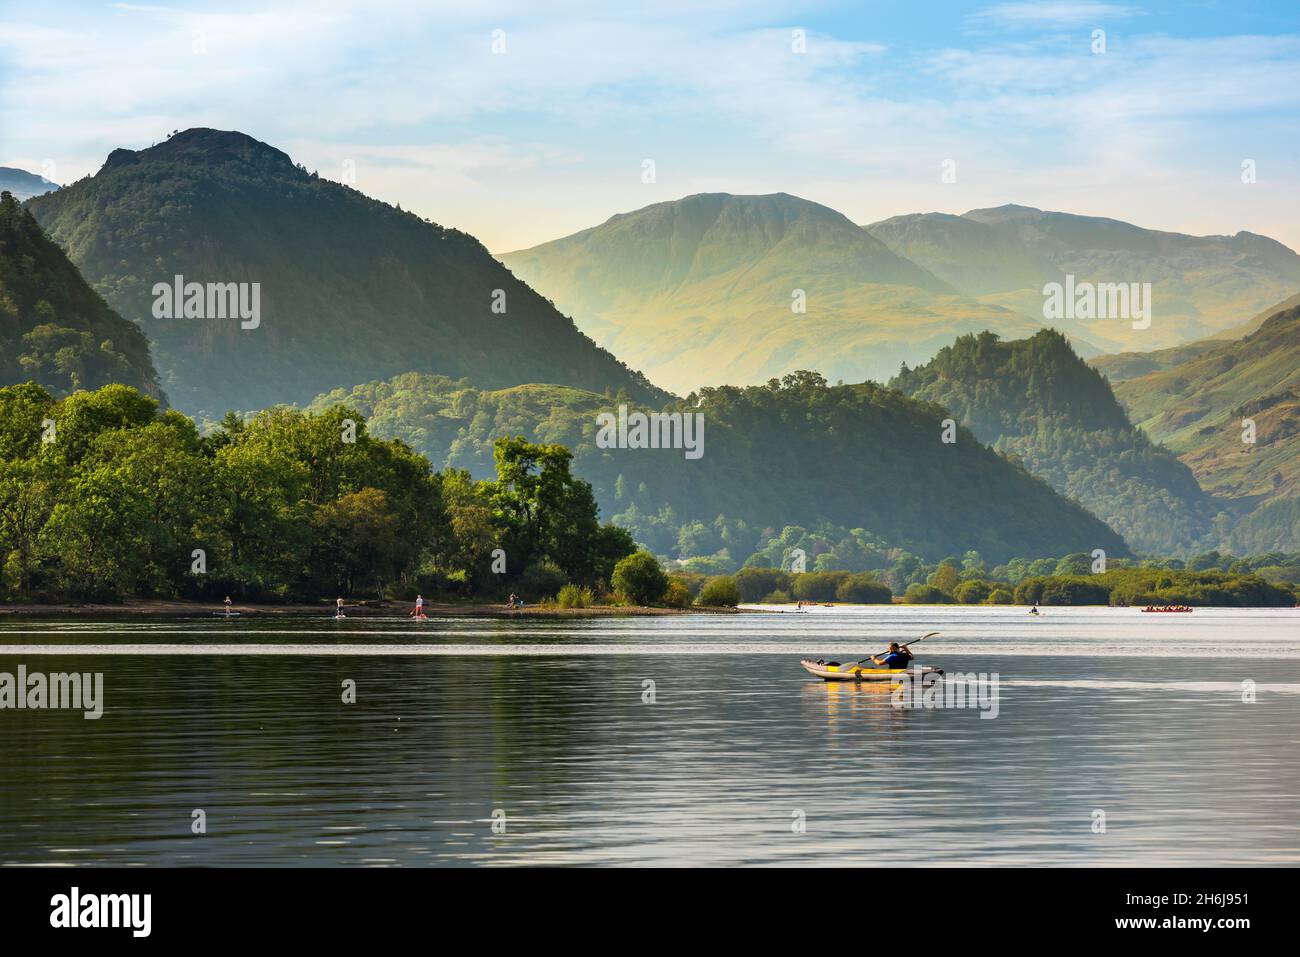 Lake District UK, view on a summer morning of Derwent Water with the high peaks of Borrowdale visible to the south of the lake, Cumbria, England, UK Stock Photo